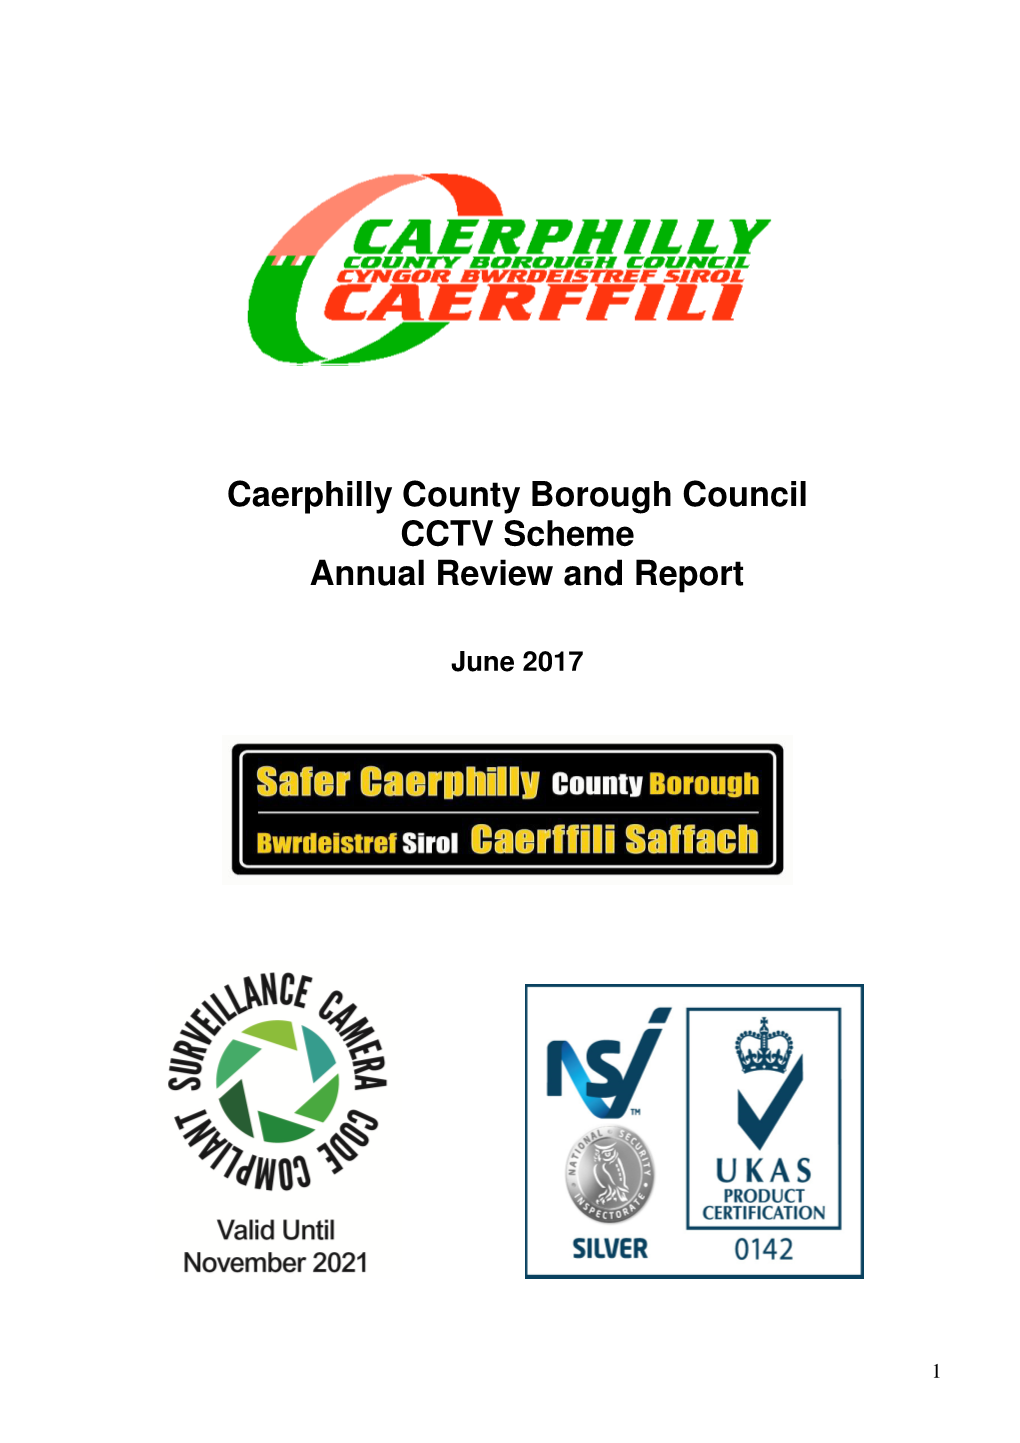 Caerphilly County Borough Council CCTV Scheme Annual Review and Report